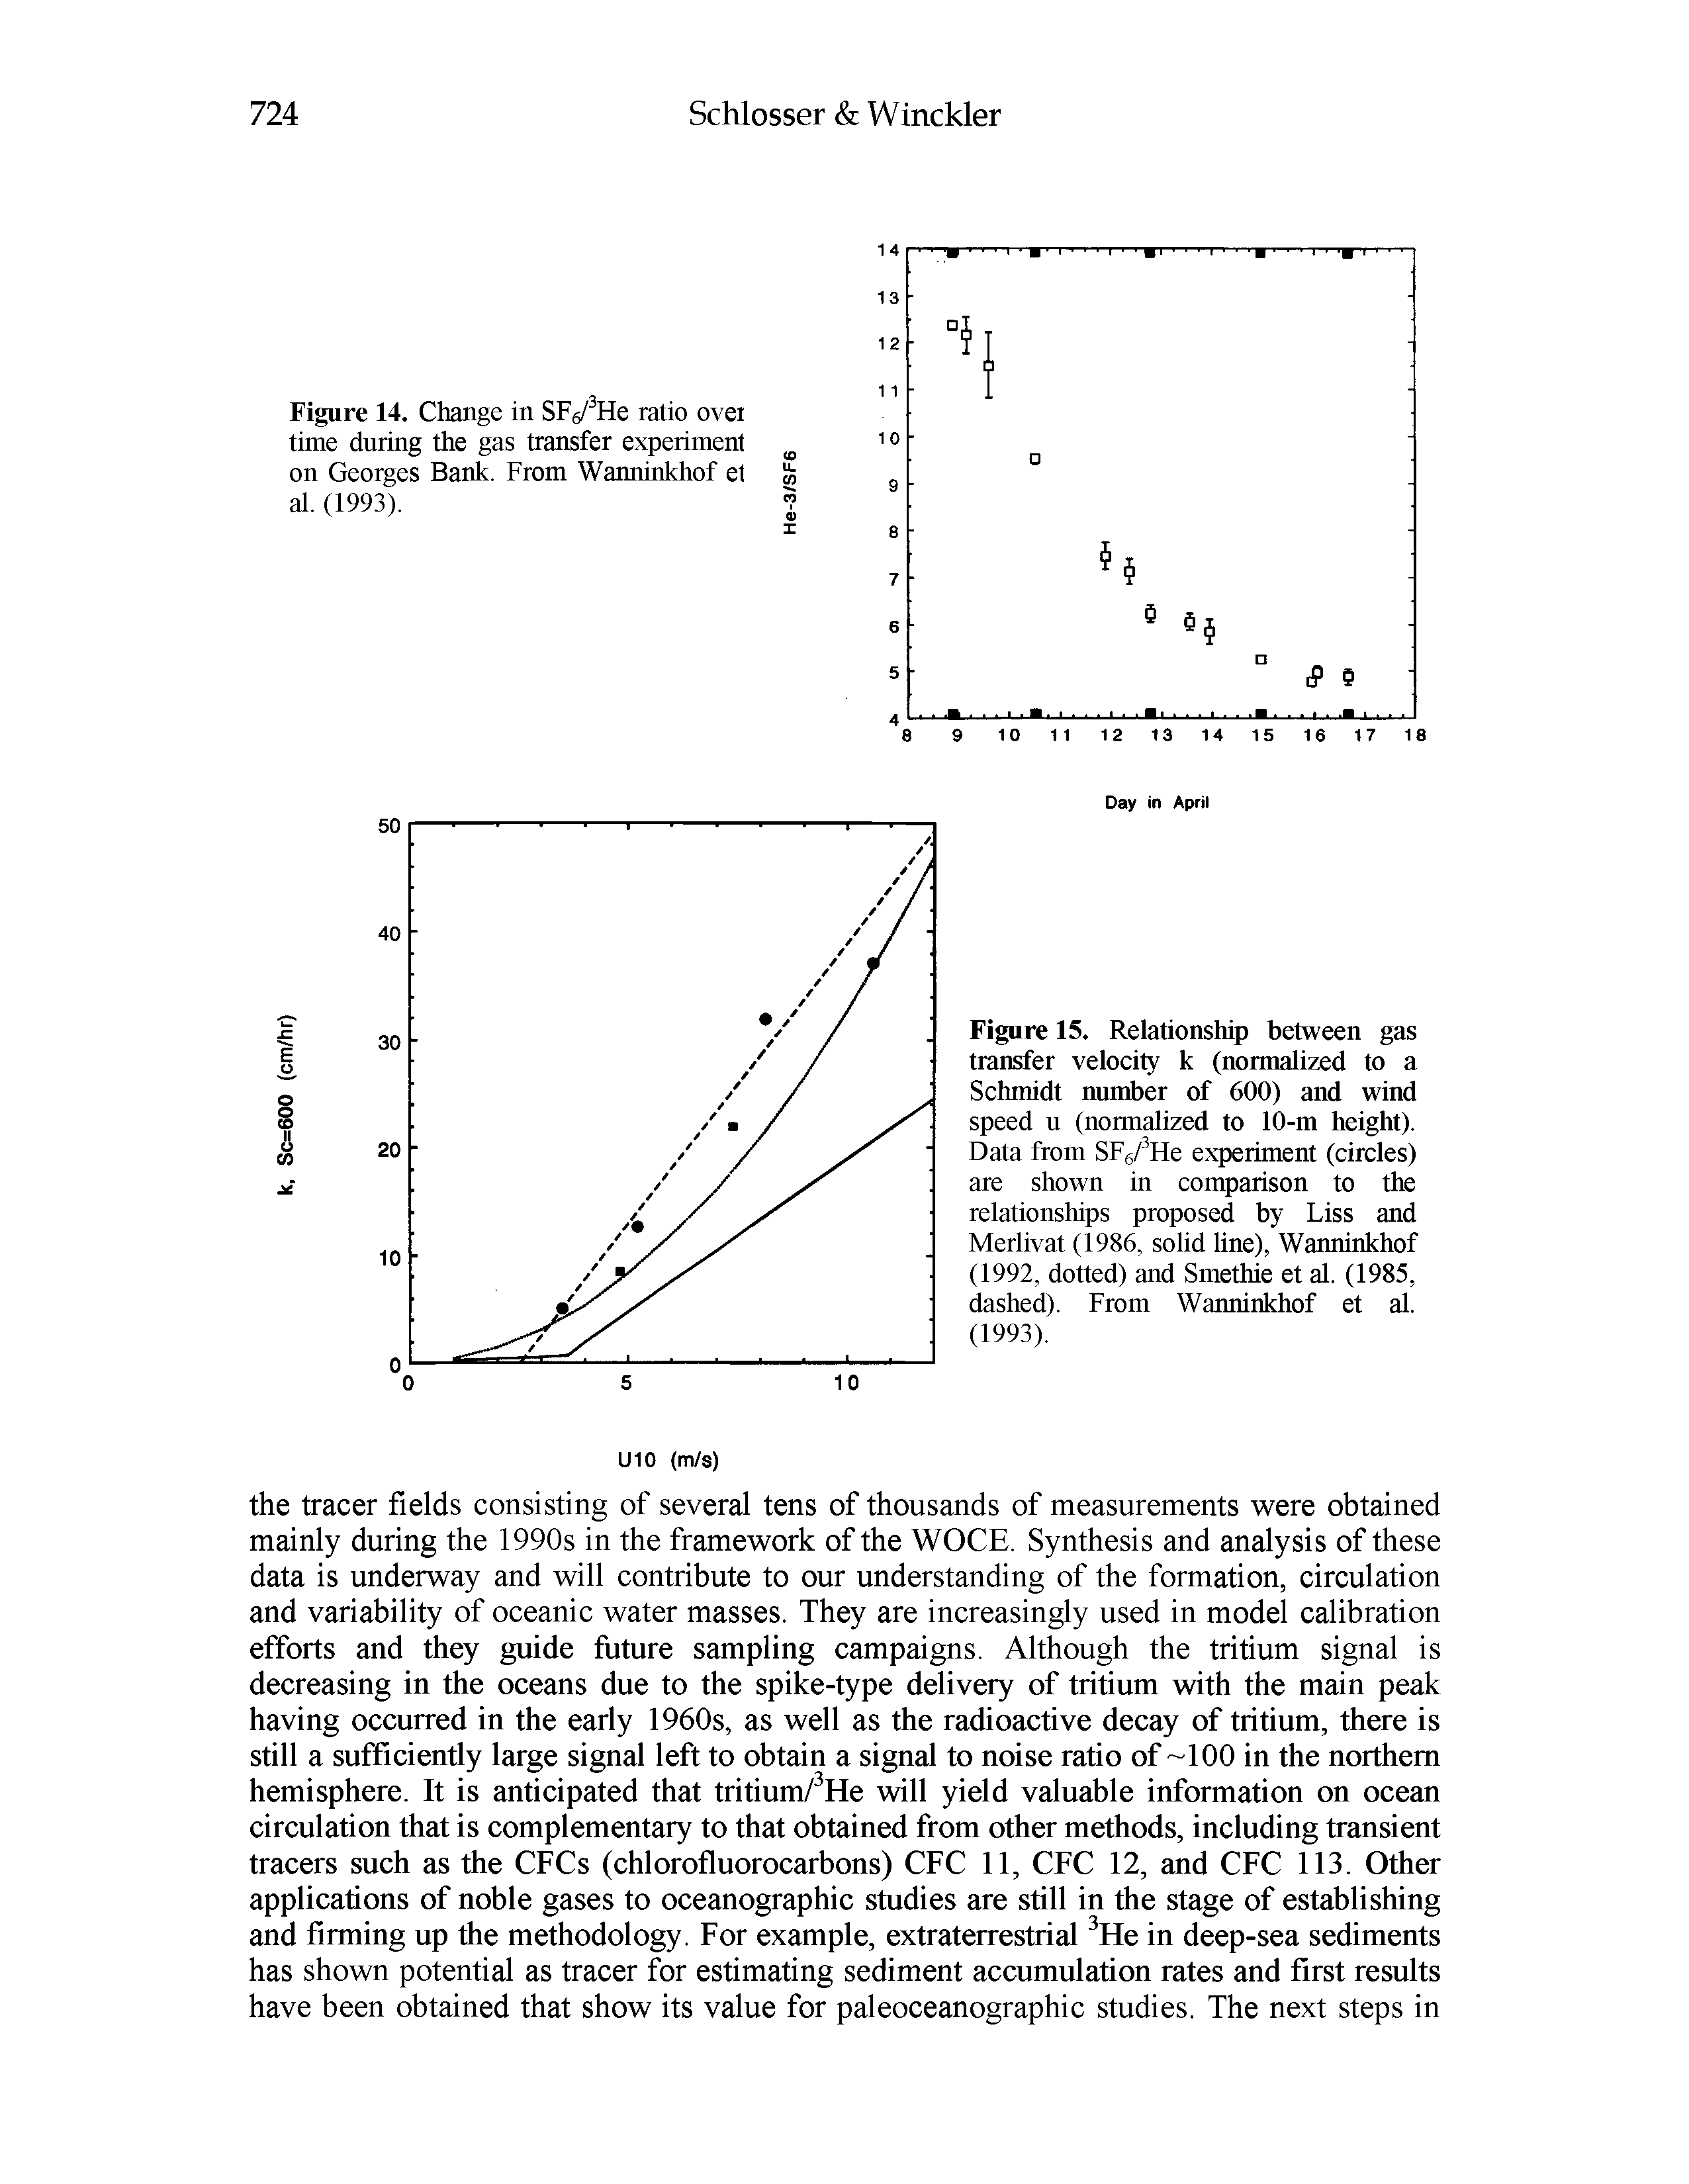 Figure 15. Relationship between gas transfer velocity k (normalized to a Schmidt number of 600) and wind speed u (normalized to 10-m height). Data from SFs/ He experiment (circles) are shown in comparison to the relationships proposed by Liss and Merlivat (1986, solid line), Wanninkhof (1992, dotted) and Smethie et al. (1985, dashed). From Wanninkhof et al. (1993).